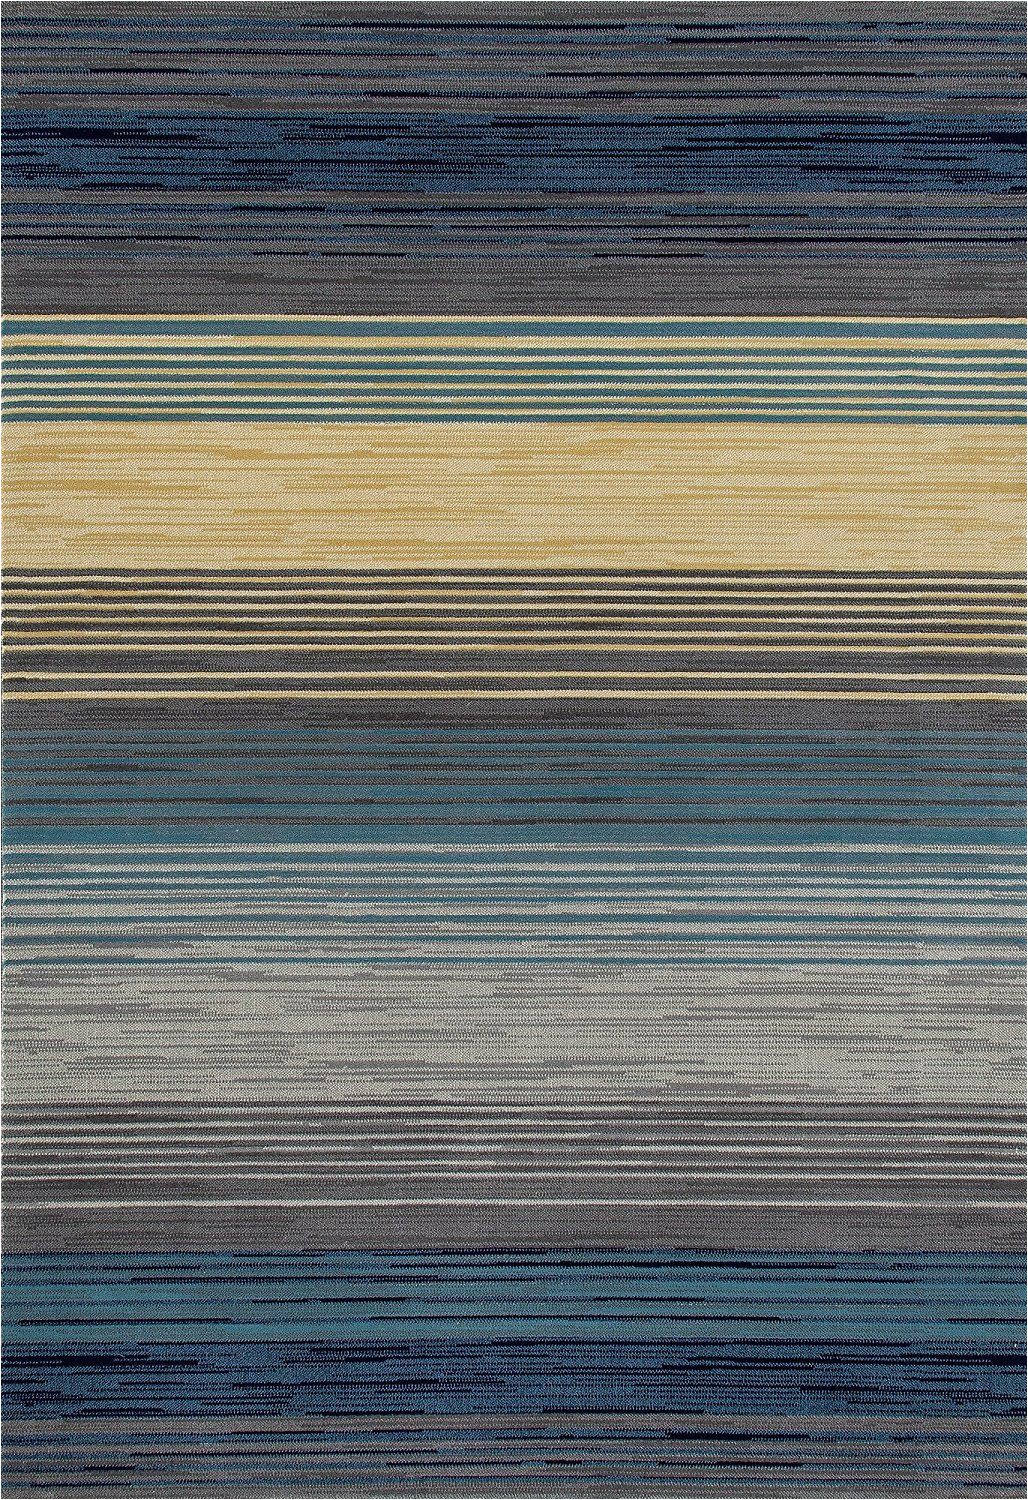 Blue and Gray Striped Rug Art Carpet Bastille Collection Heathered Stripe Border Woven